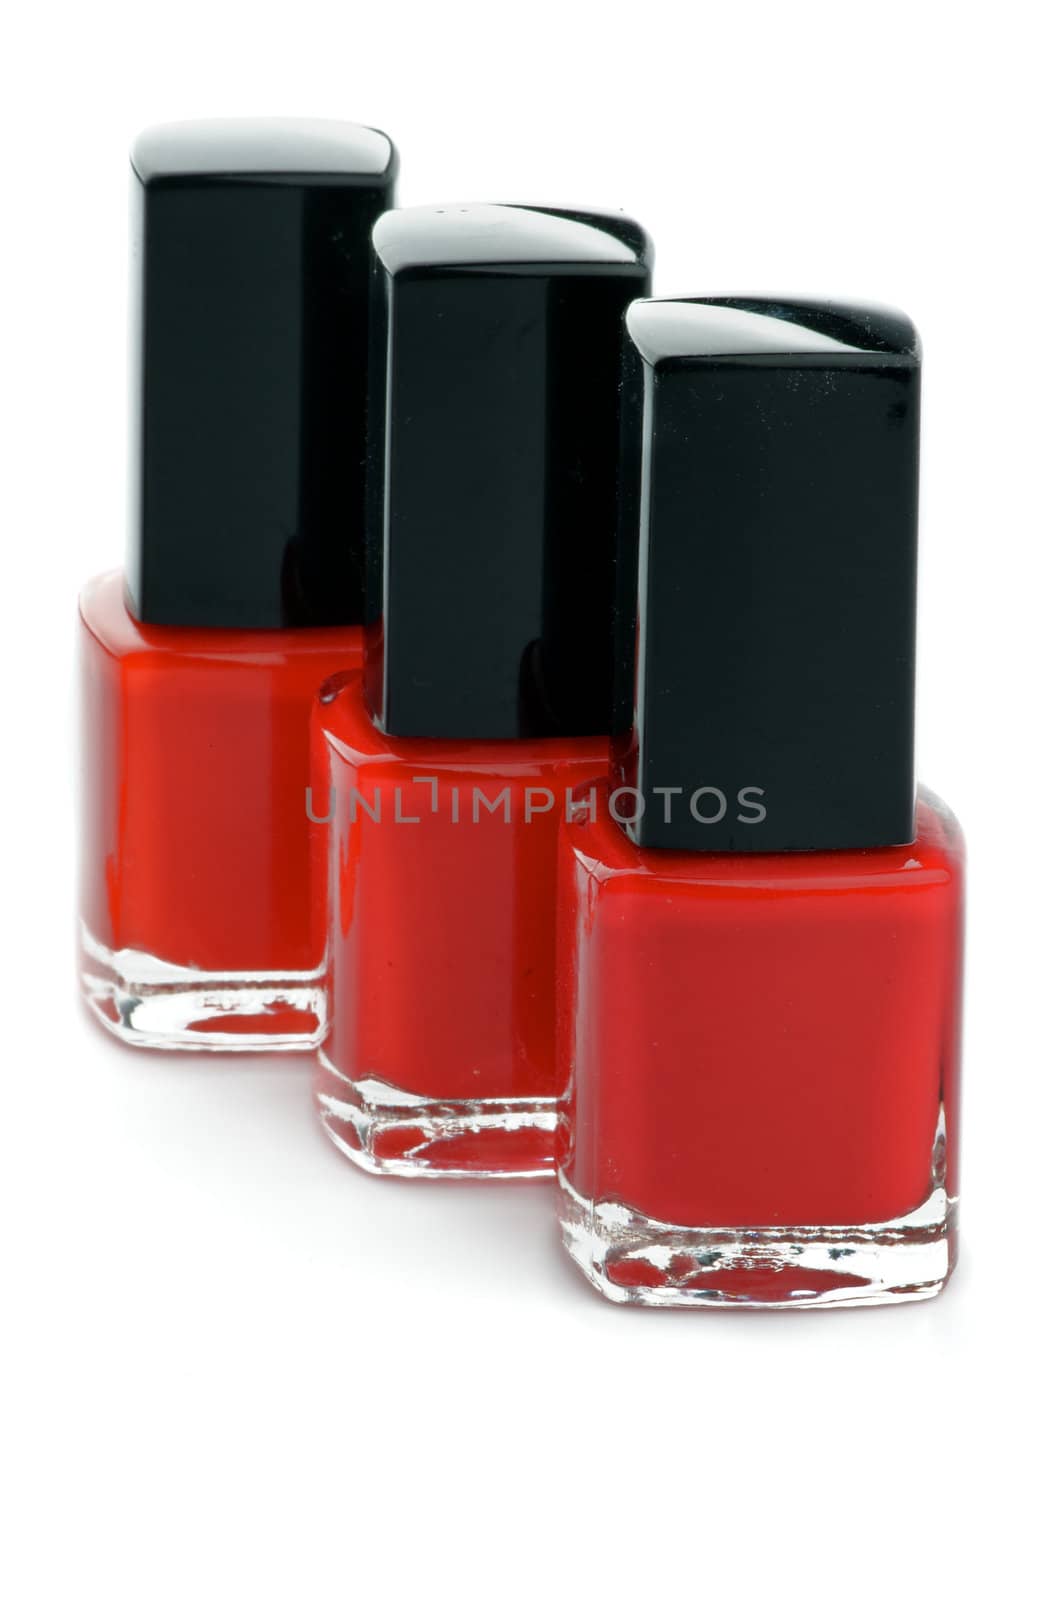 Three Shades of Red Bright Nail Varnishs isolated on white background